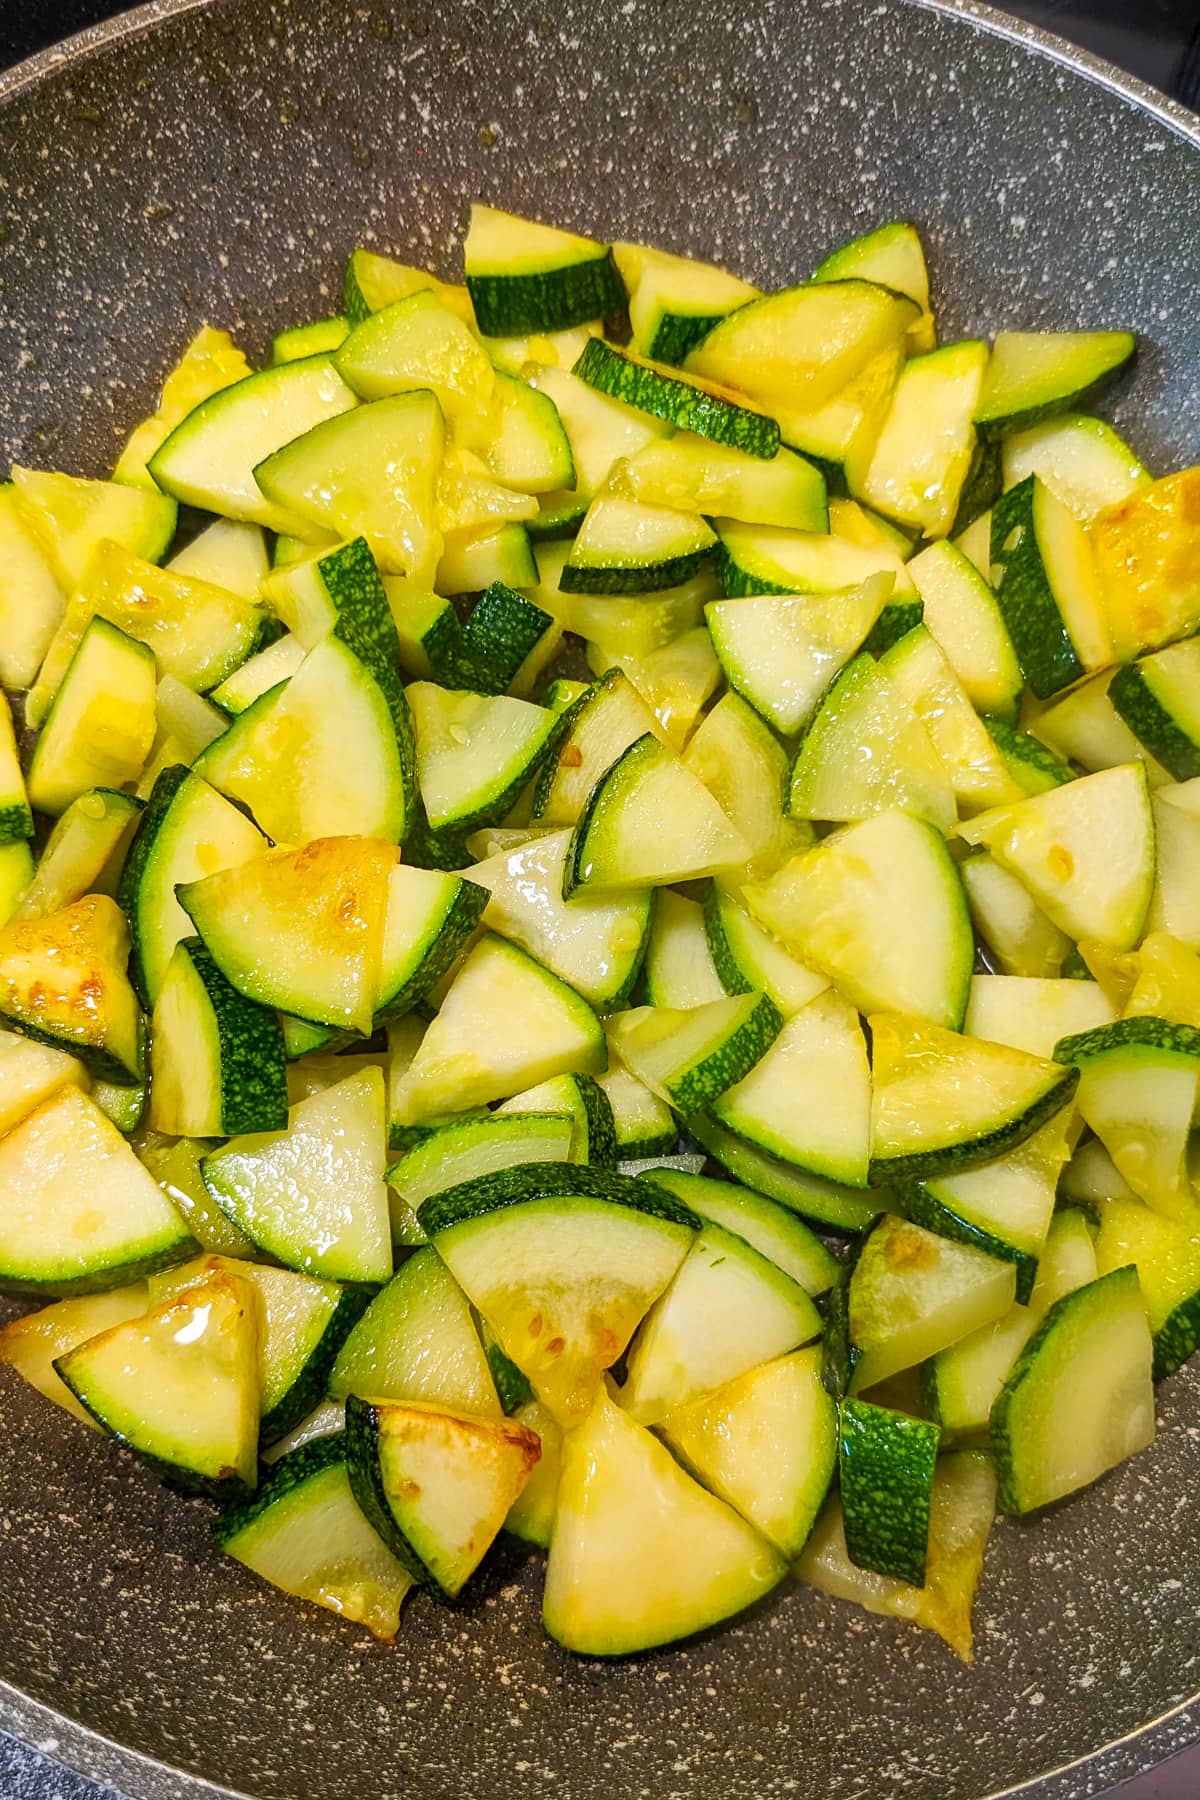 Frying pan with fried zucchini slices.